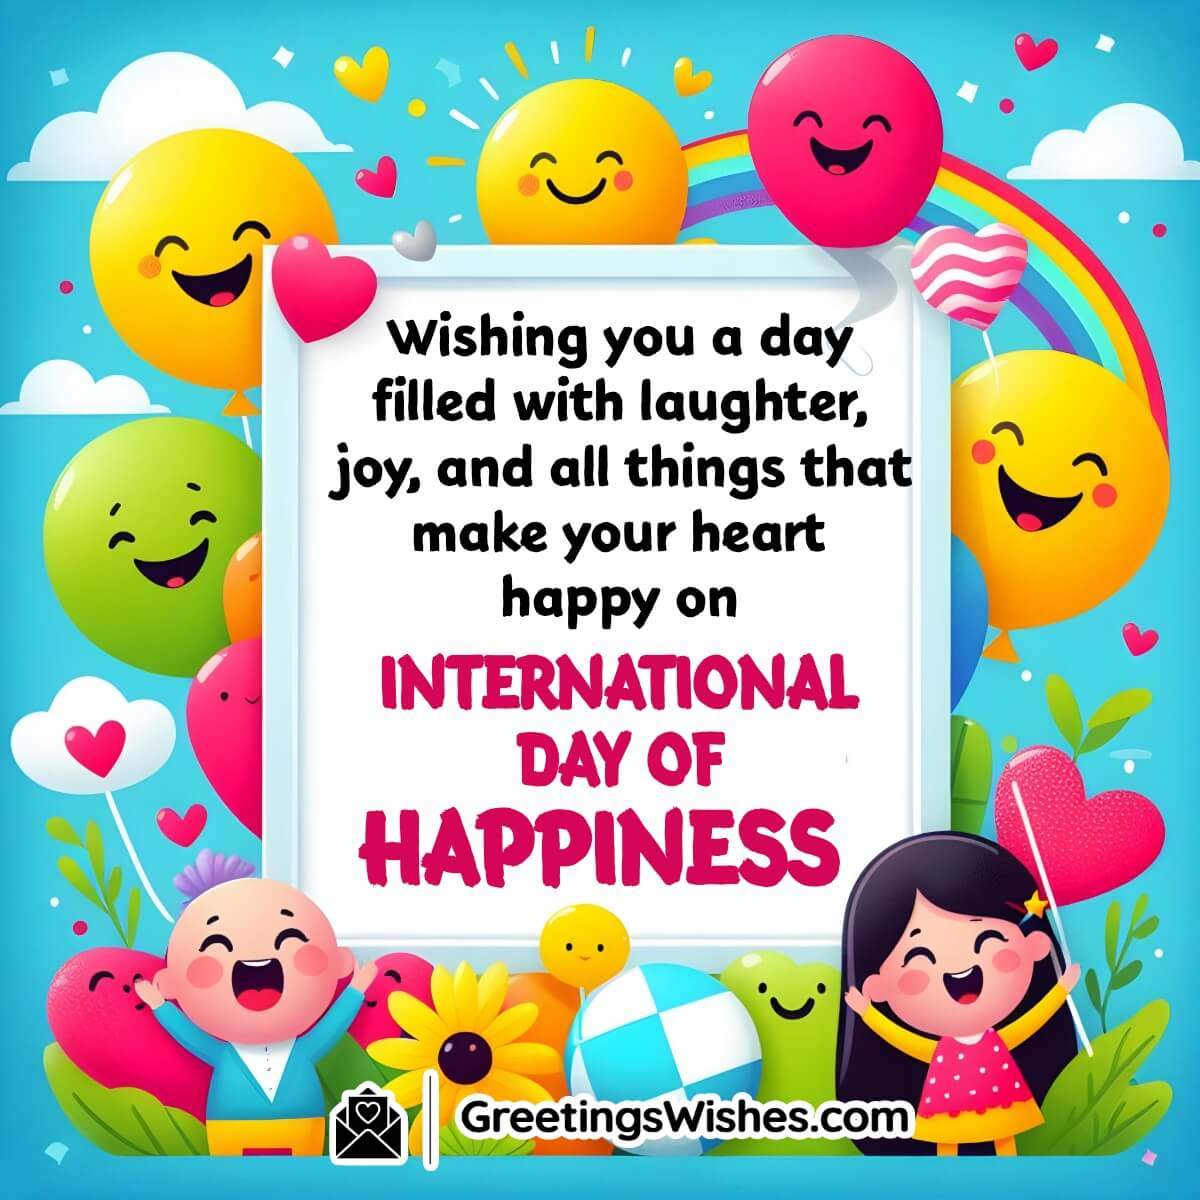 International Day Of Happiness Wishes (20th March)